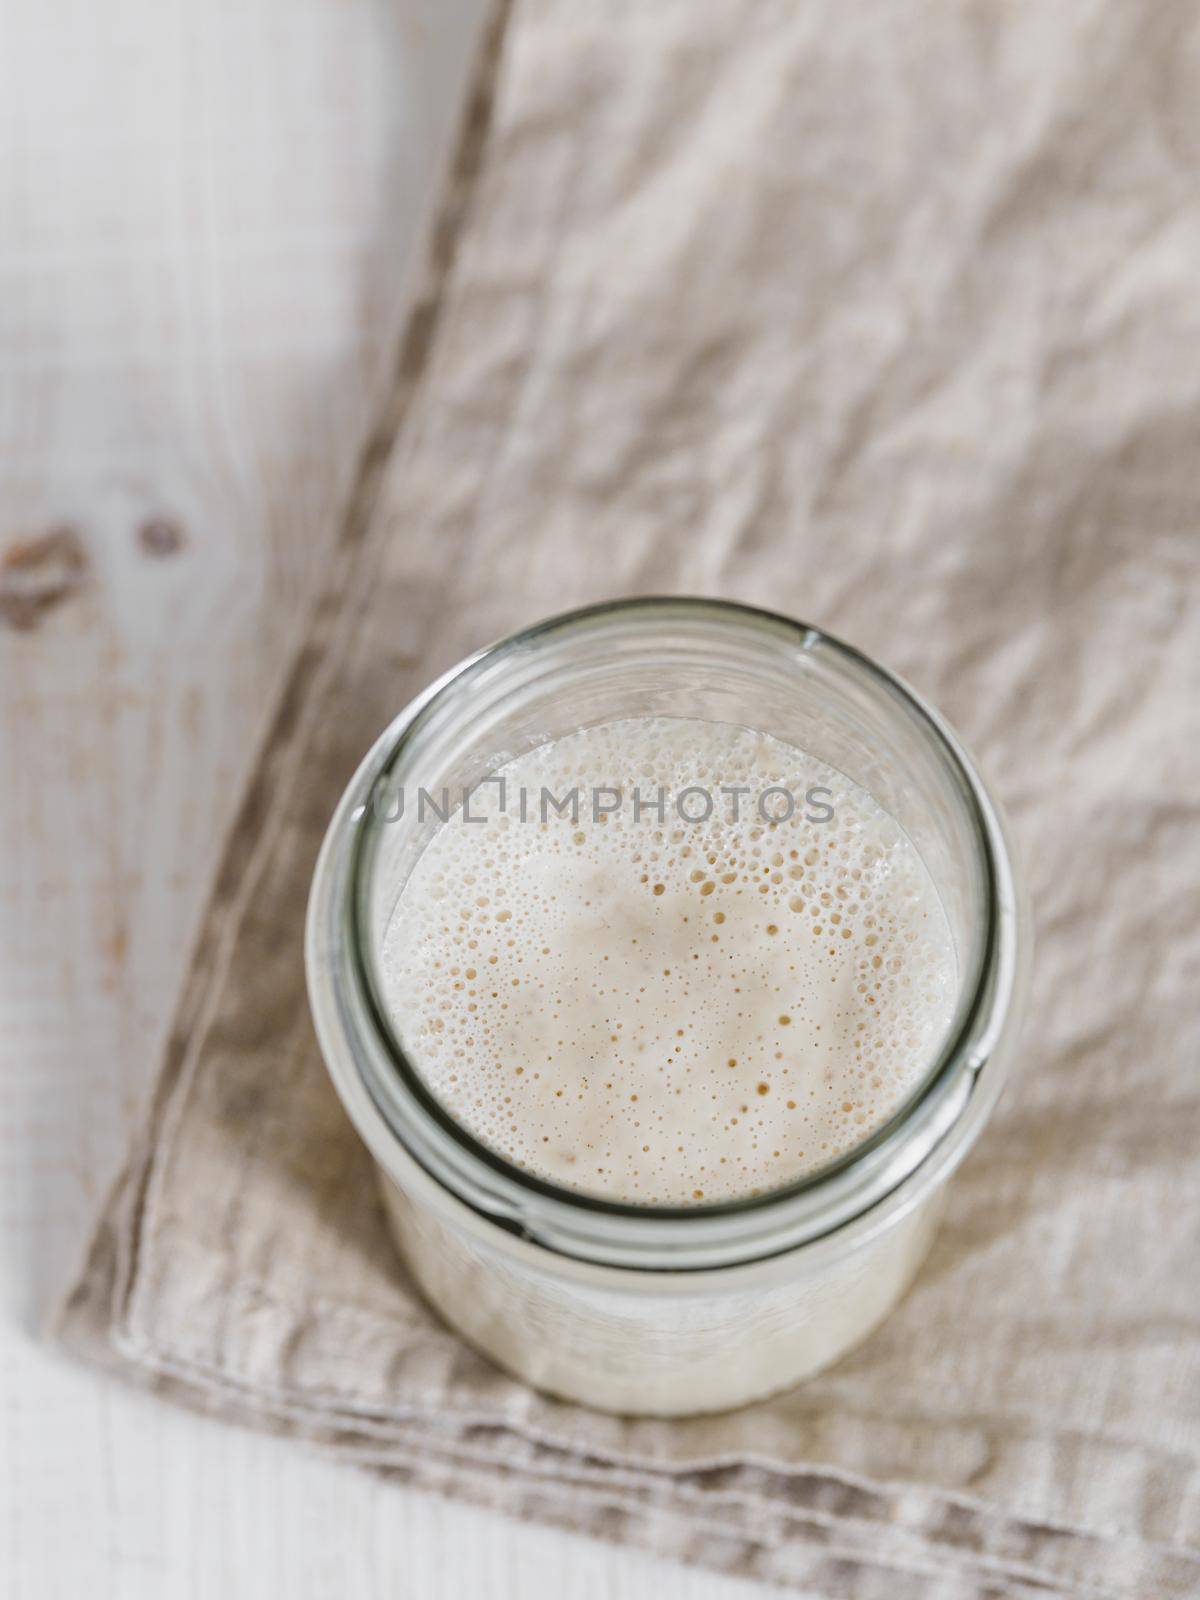 Wheat sourdough starter. Top view of glass jar with sourdough starter on white wooden background. Copy space for text or design. Vertical.